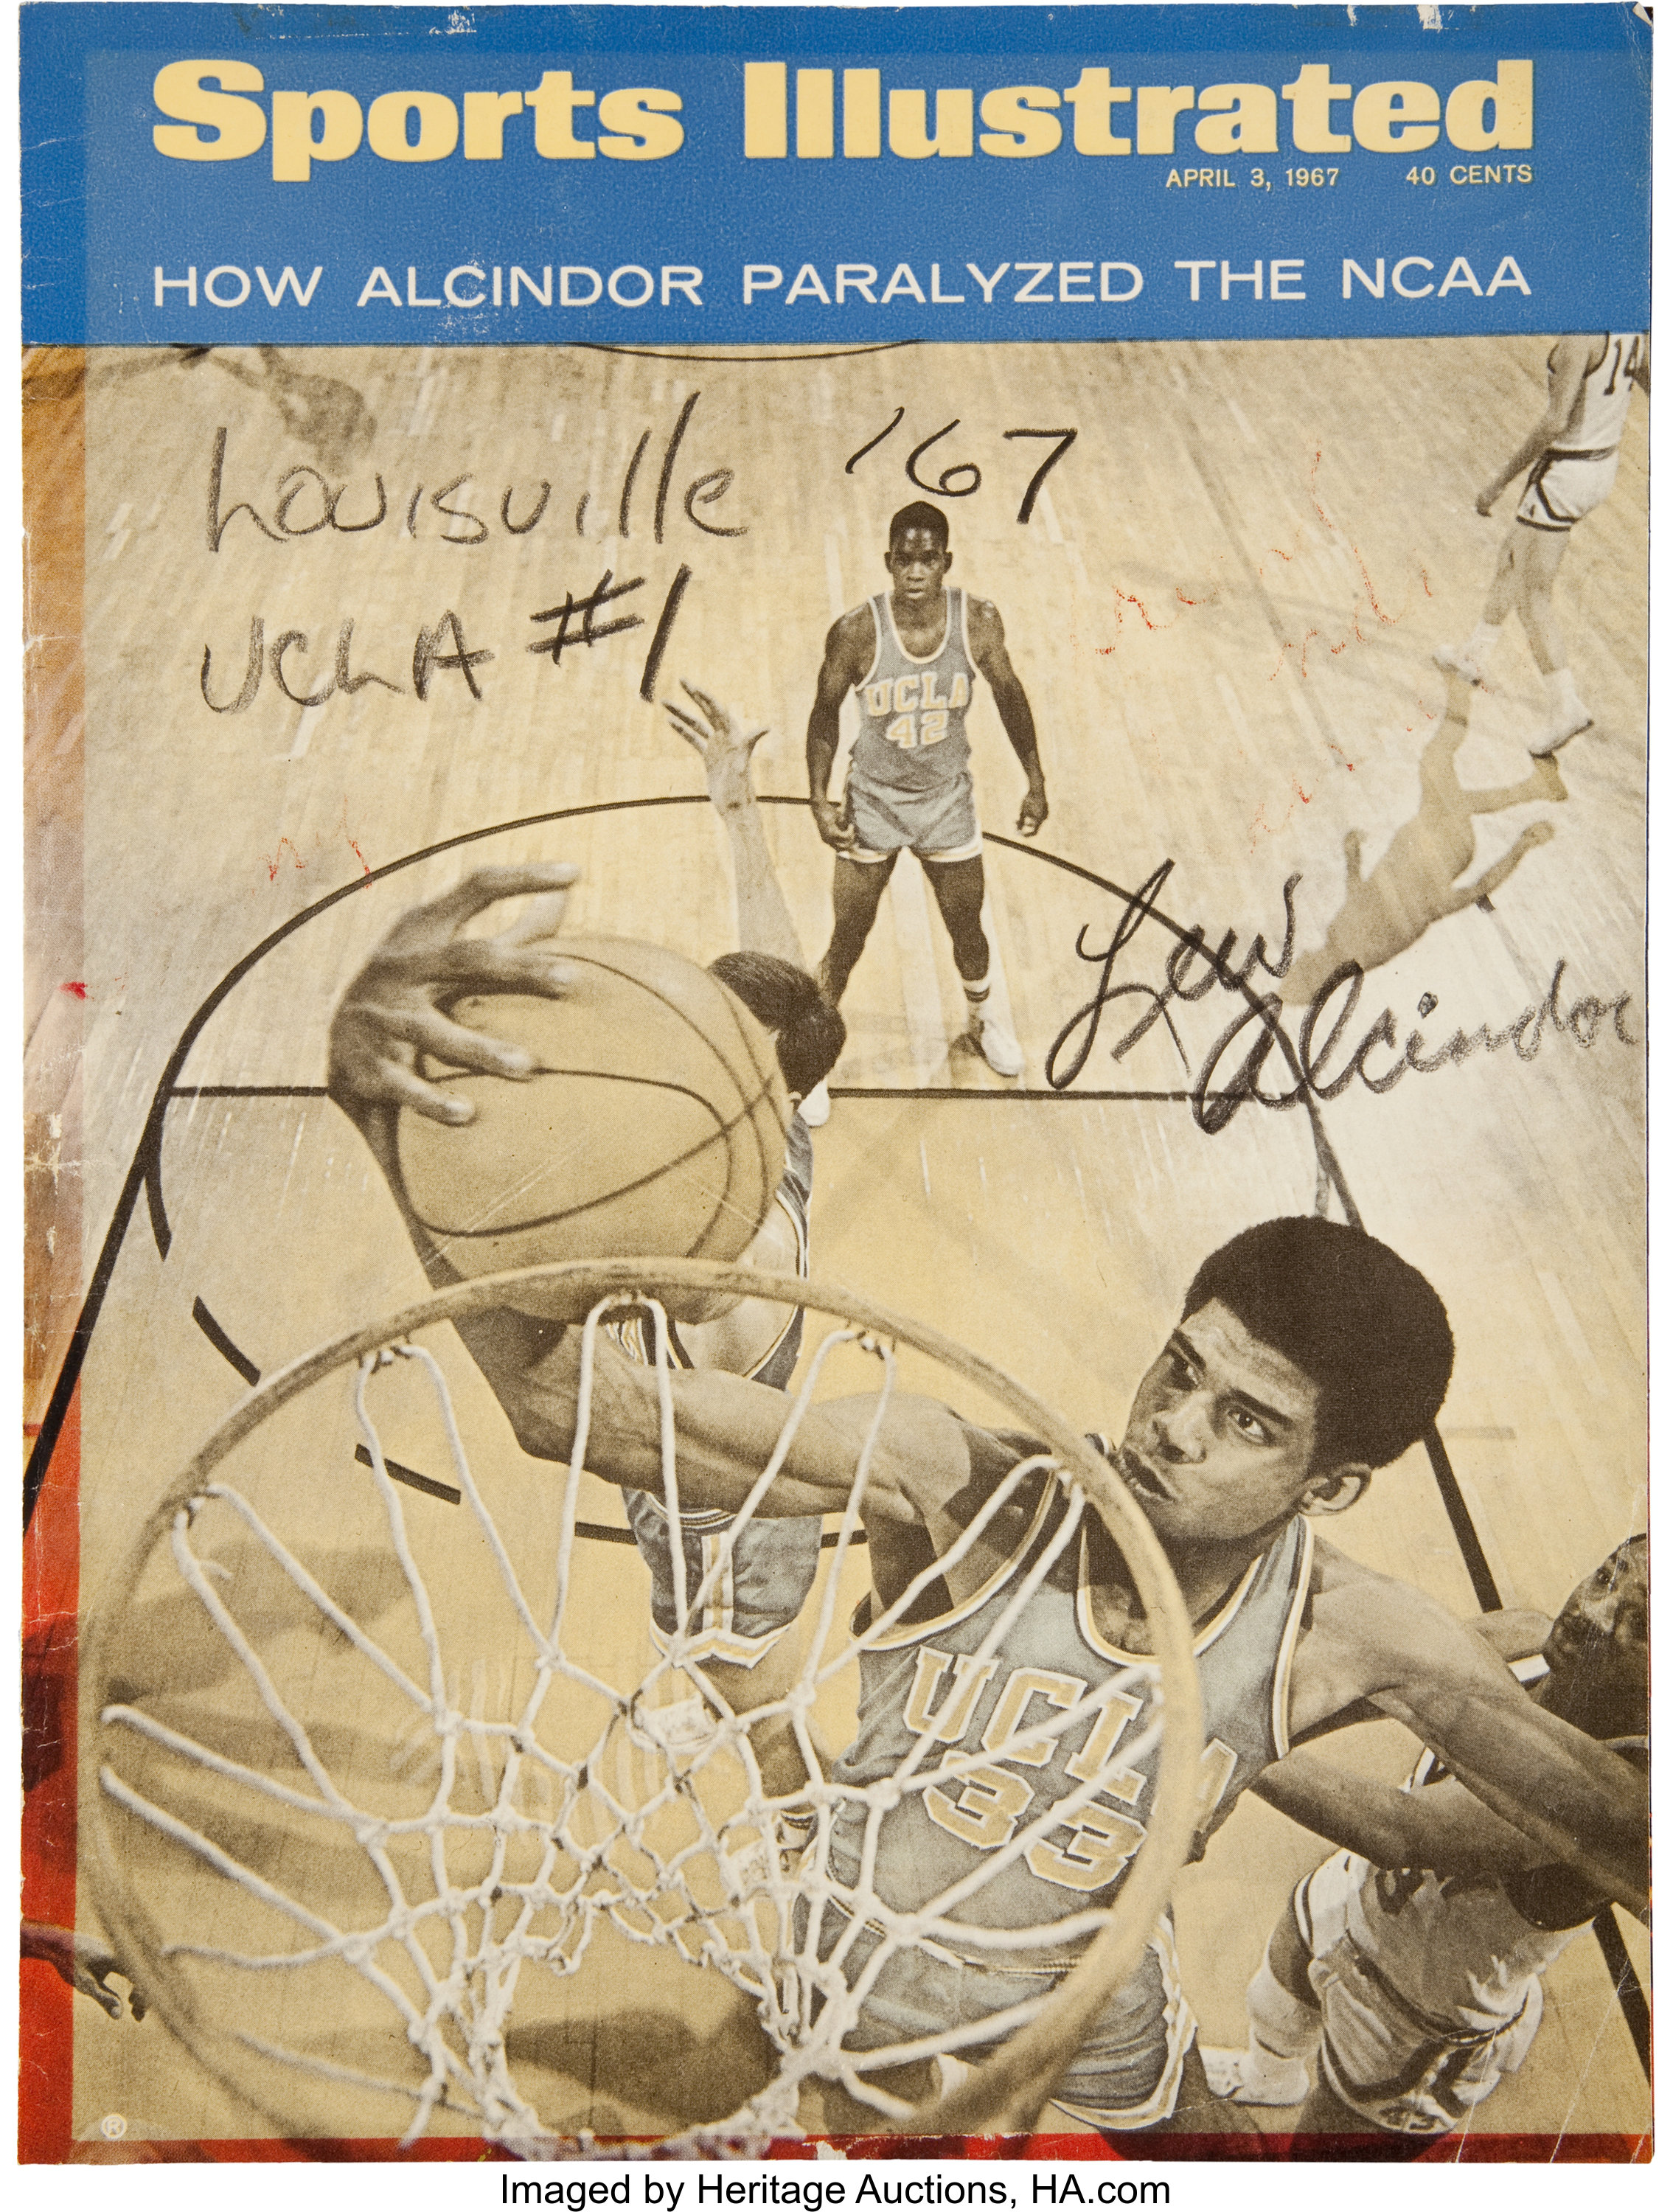 Ucla Lew Alcindor Sports Illustrated Cover Framed Print by